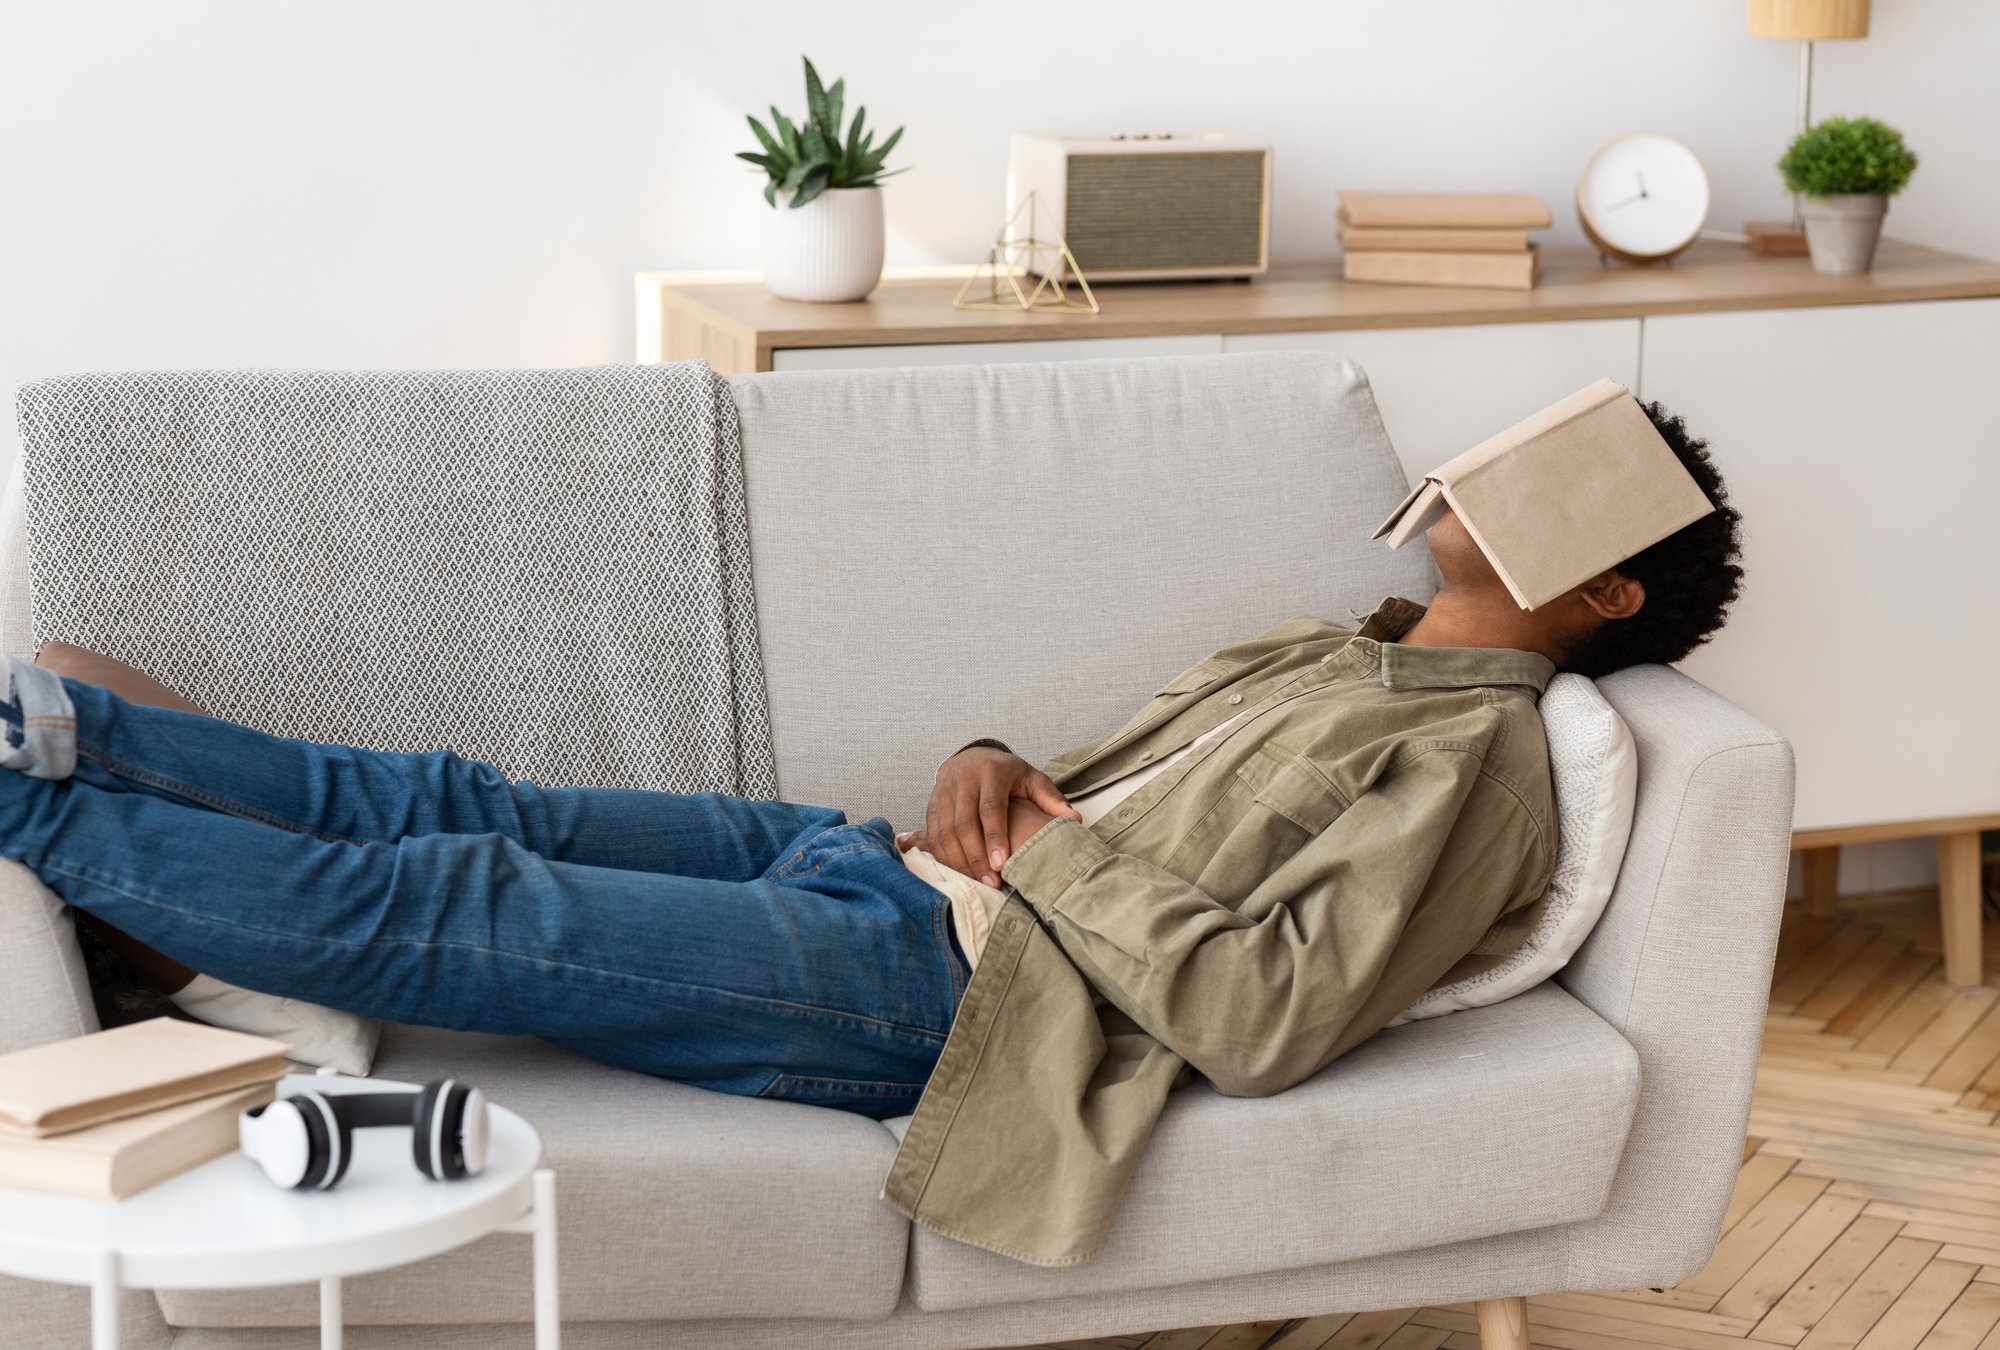 Man napping on couch with book on his face